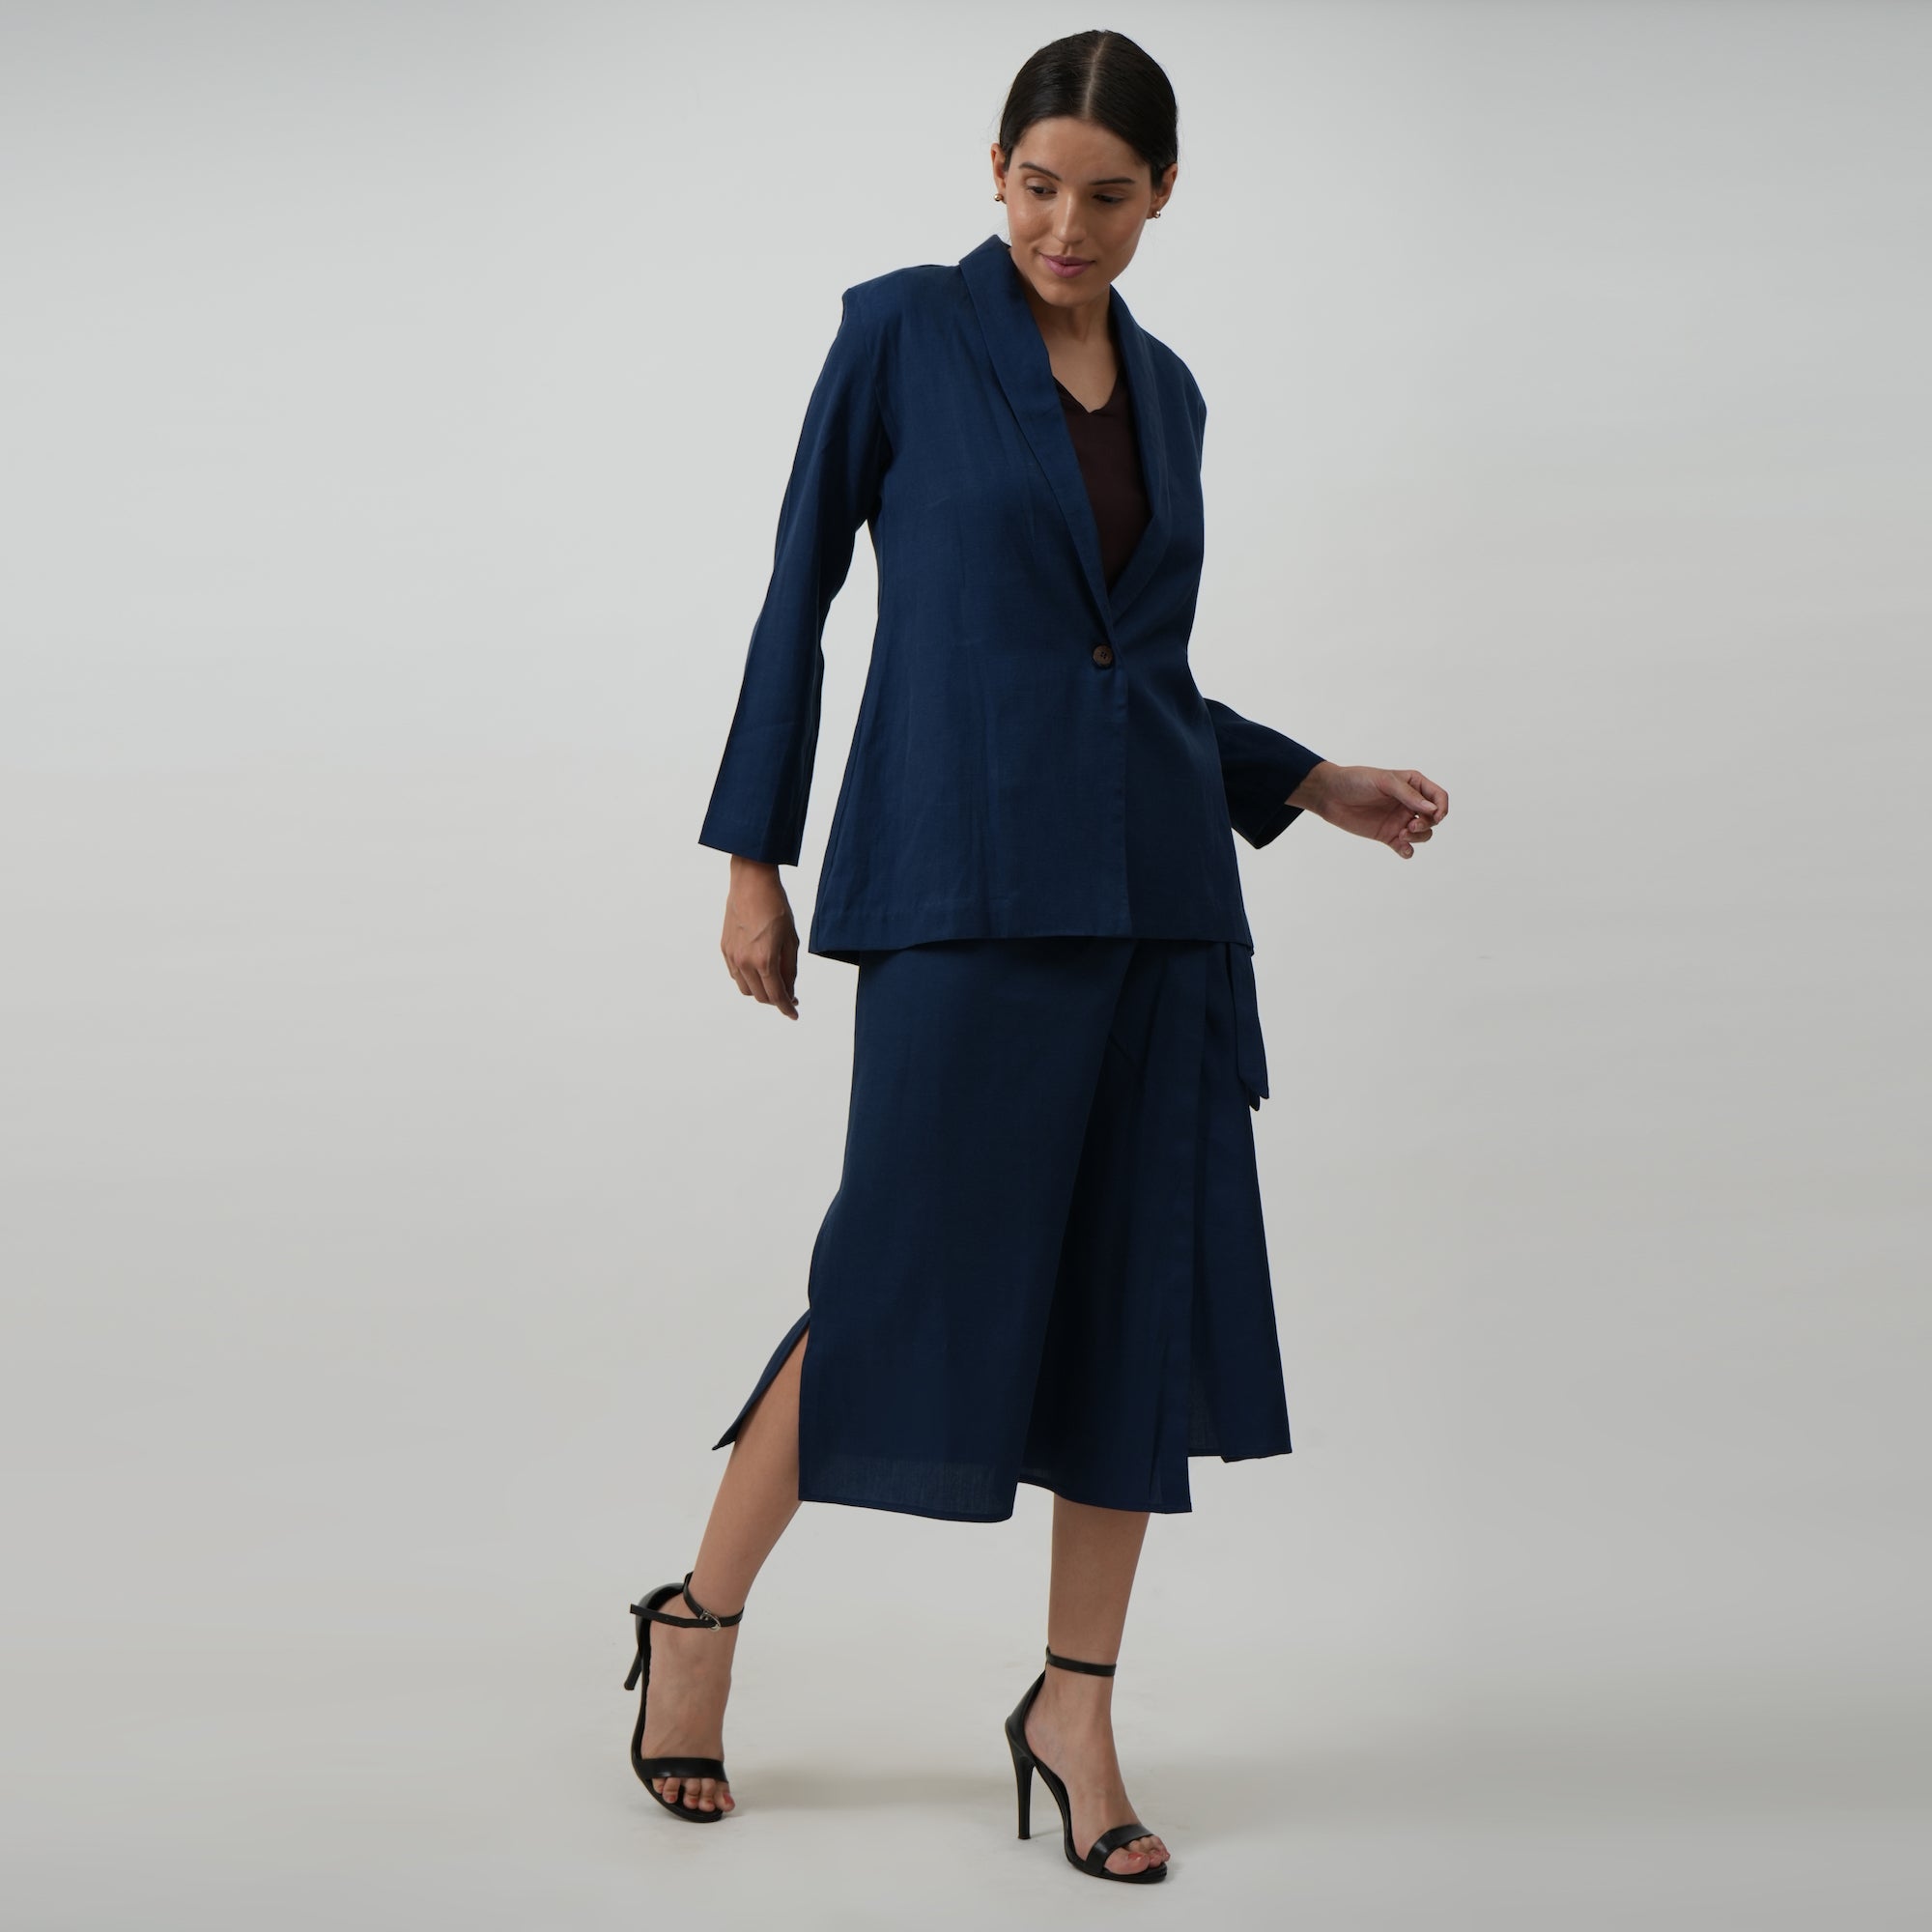 Donna Skirt Set of 3 - Wrap Skirt, Shell Top & Jacket - Navy Blue & Coffee Brown